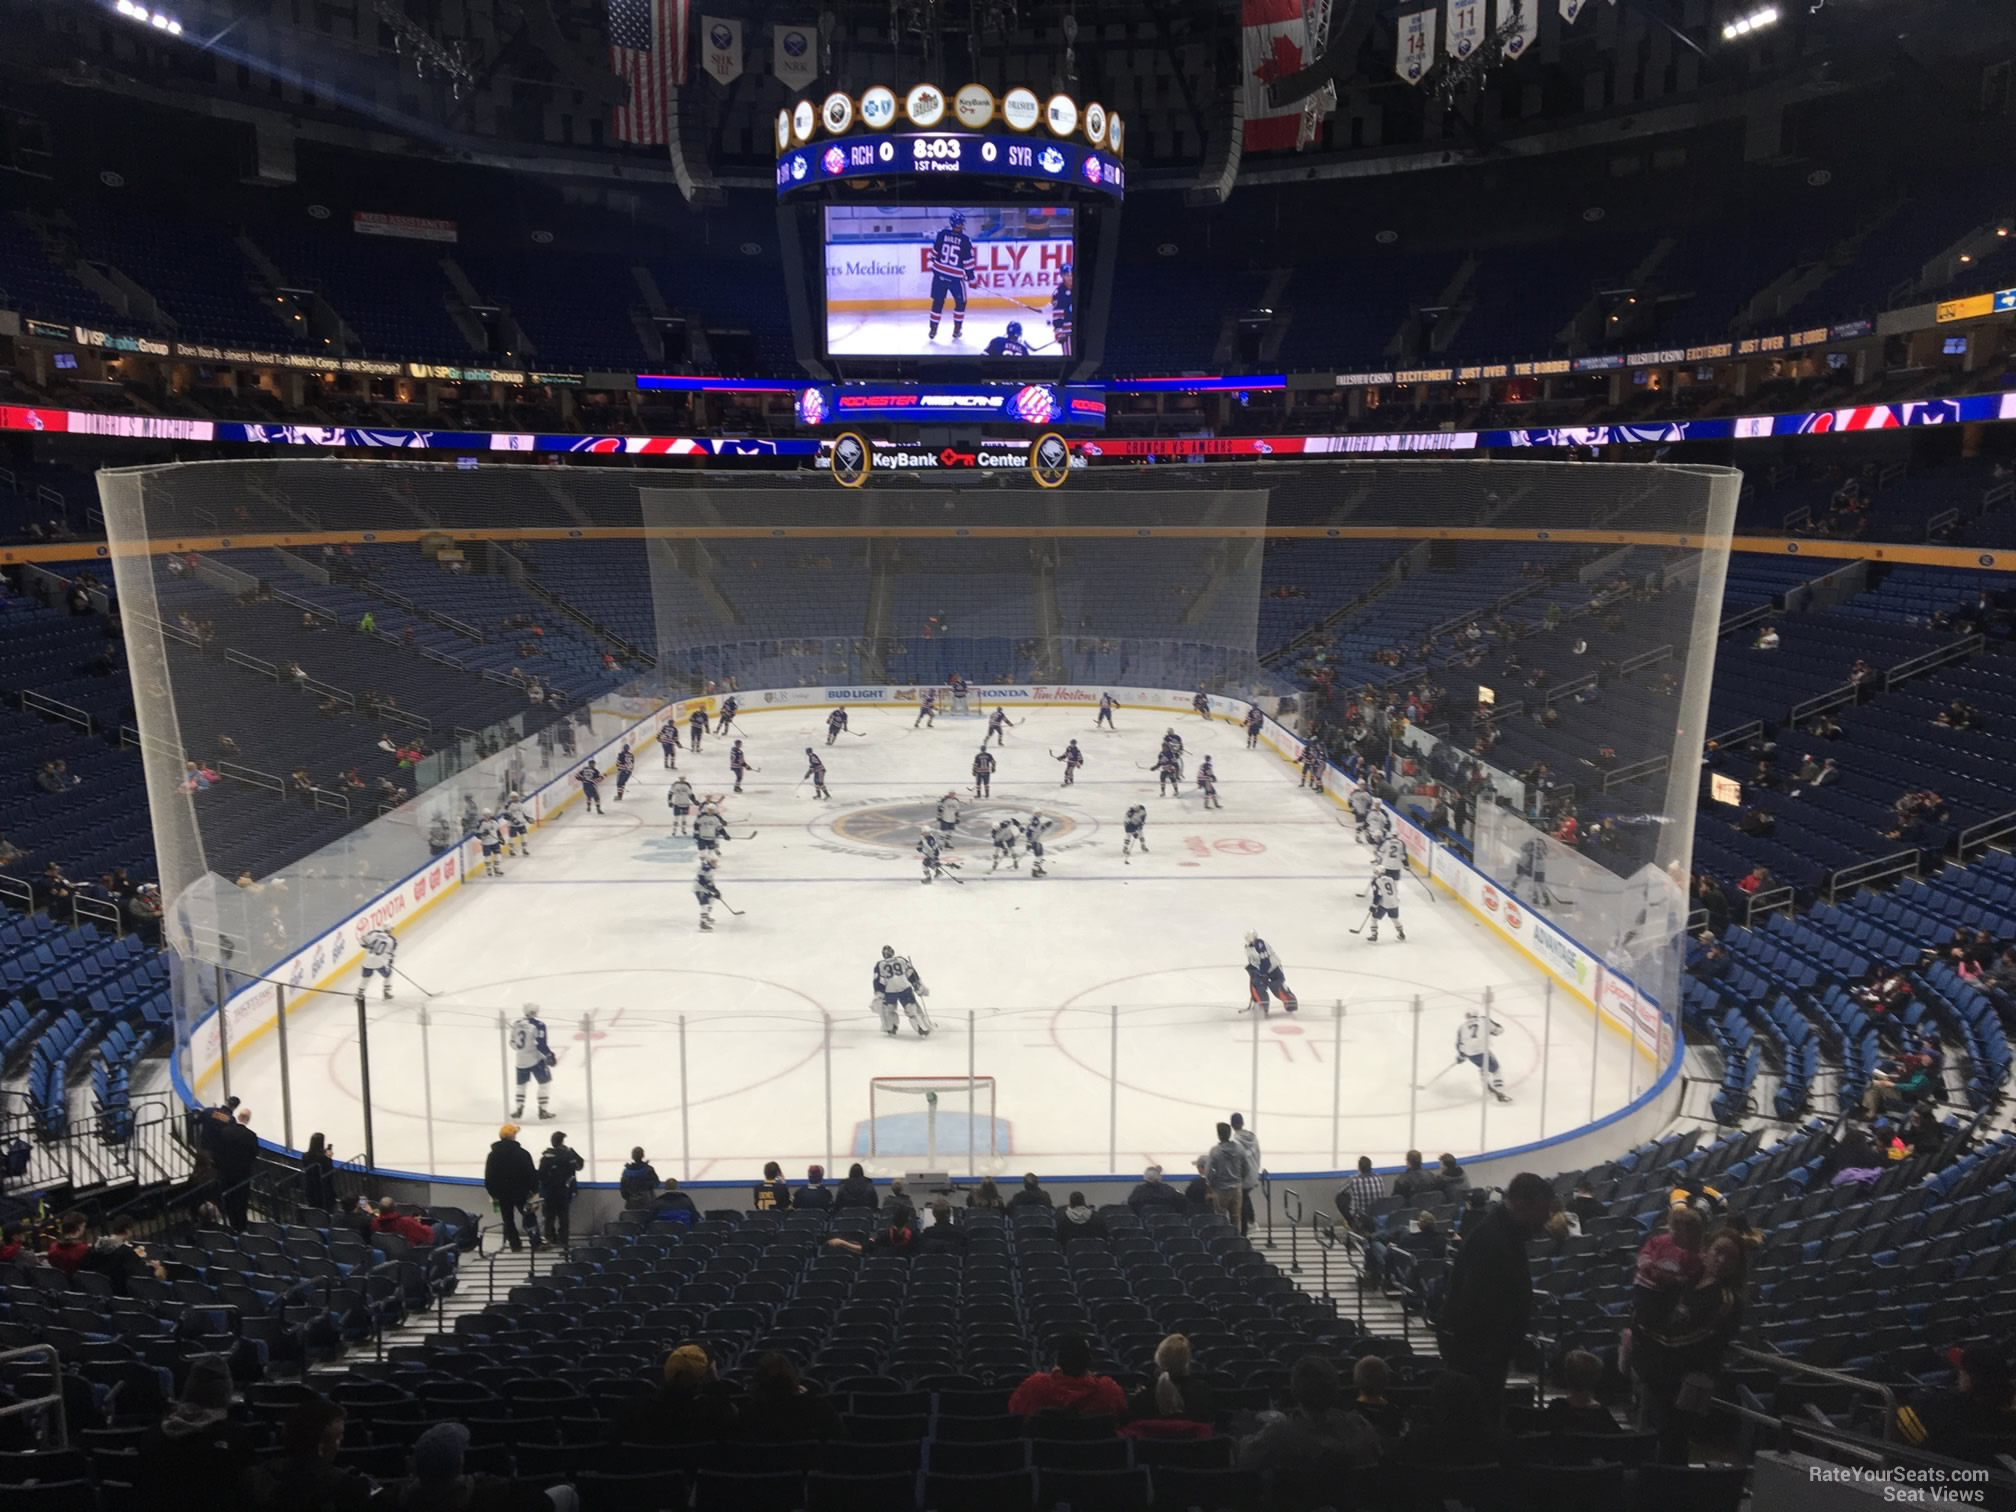 section 111, row 22 seat view  for hockey - keybank center